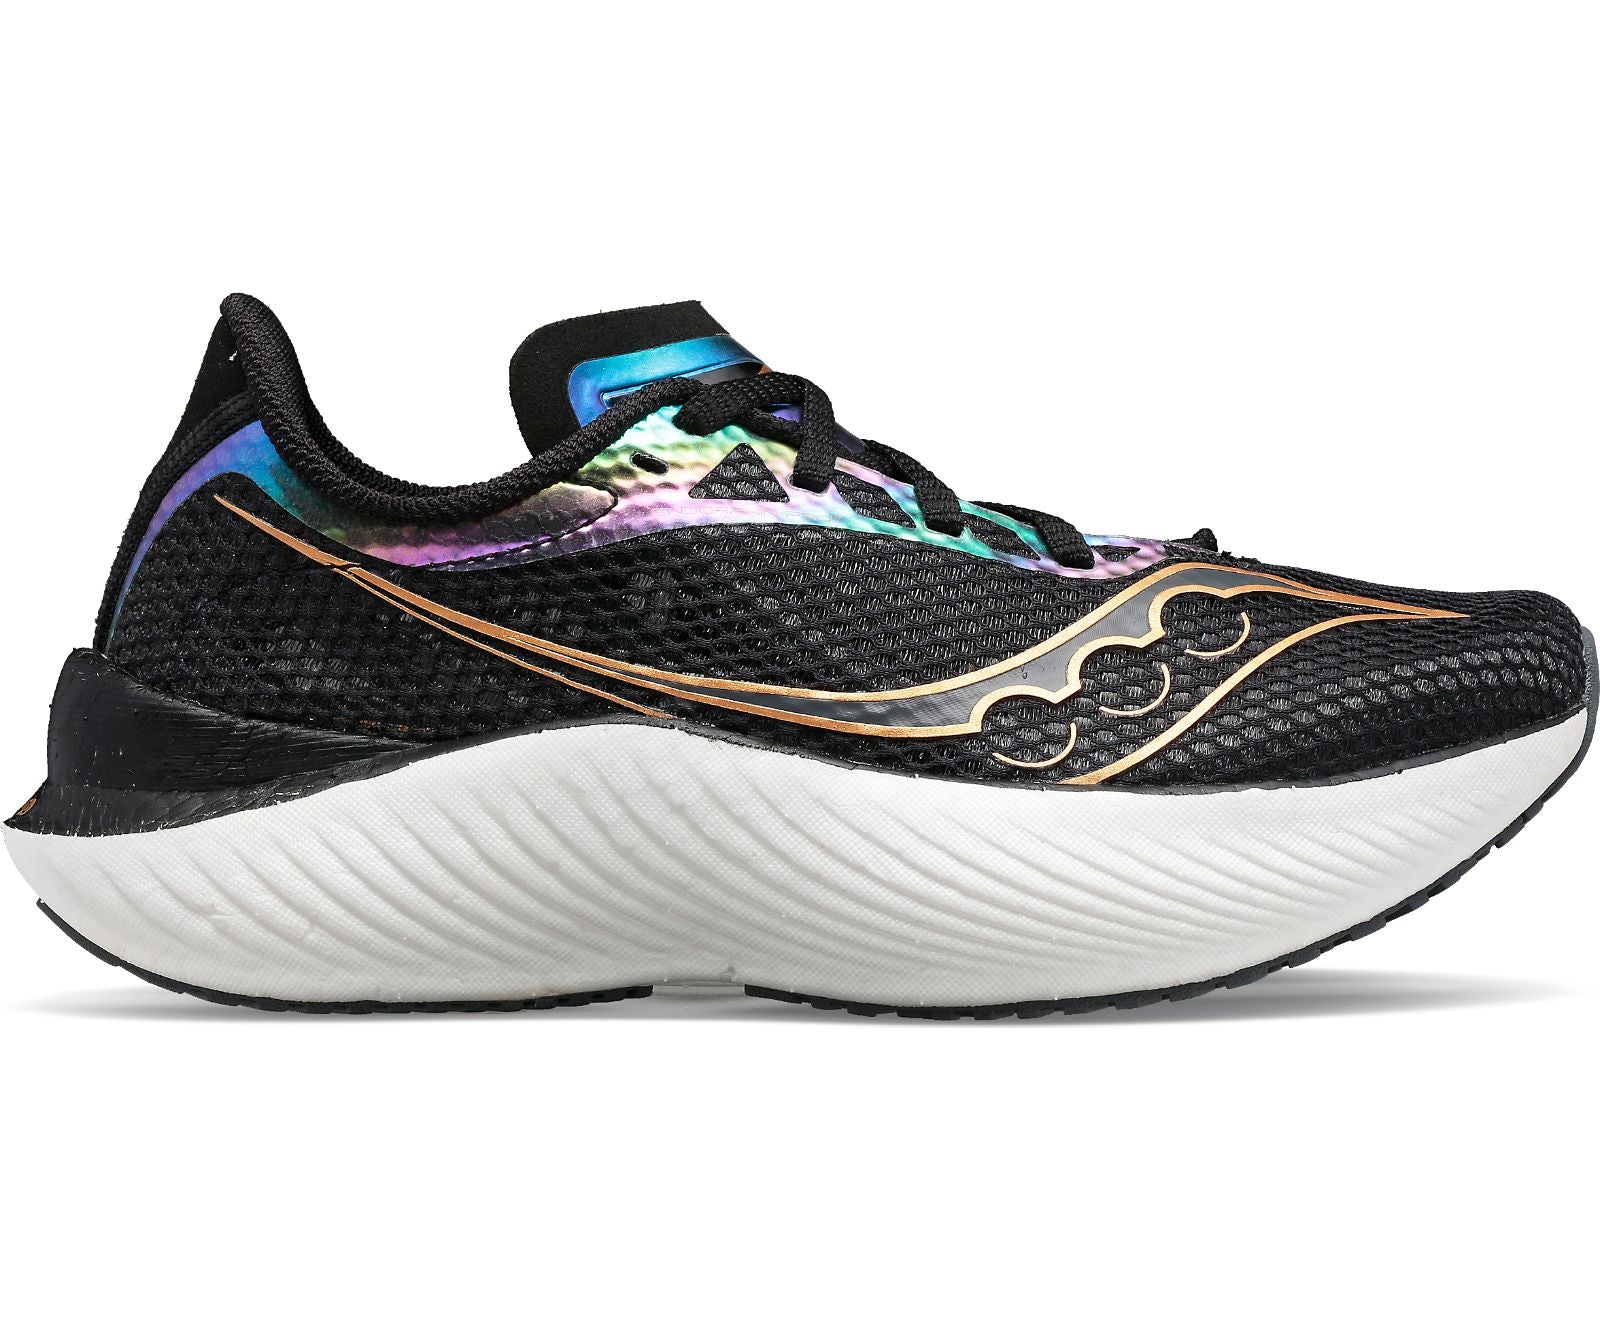 It’s speed over everything when you lace up the Endorphin Pro 3. Designed with a carbon-fiber plate and an even thicker stack of PWRRUNPB foam cushioning, you get more pop underfoot for the ultimate go-fast experience.